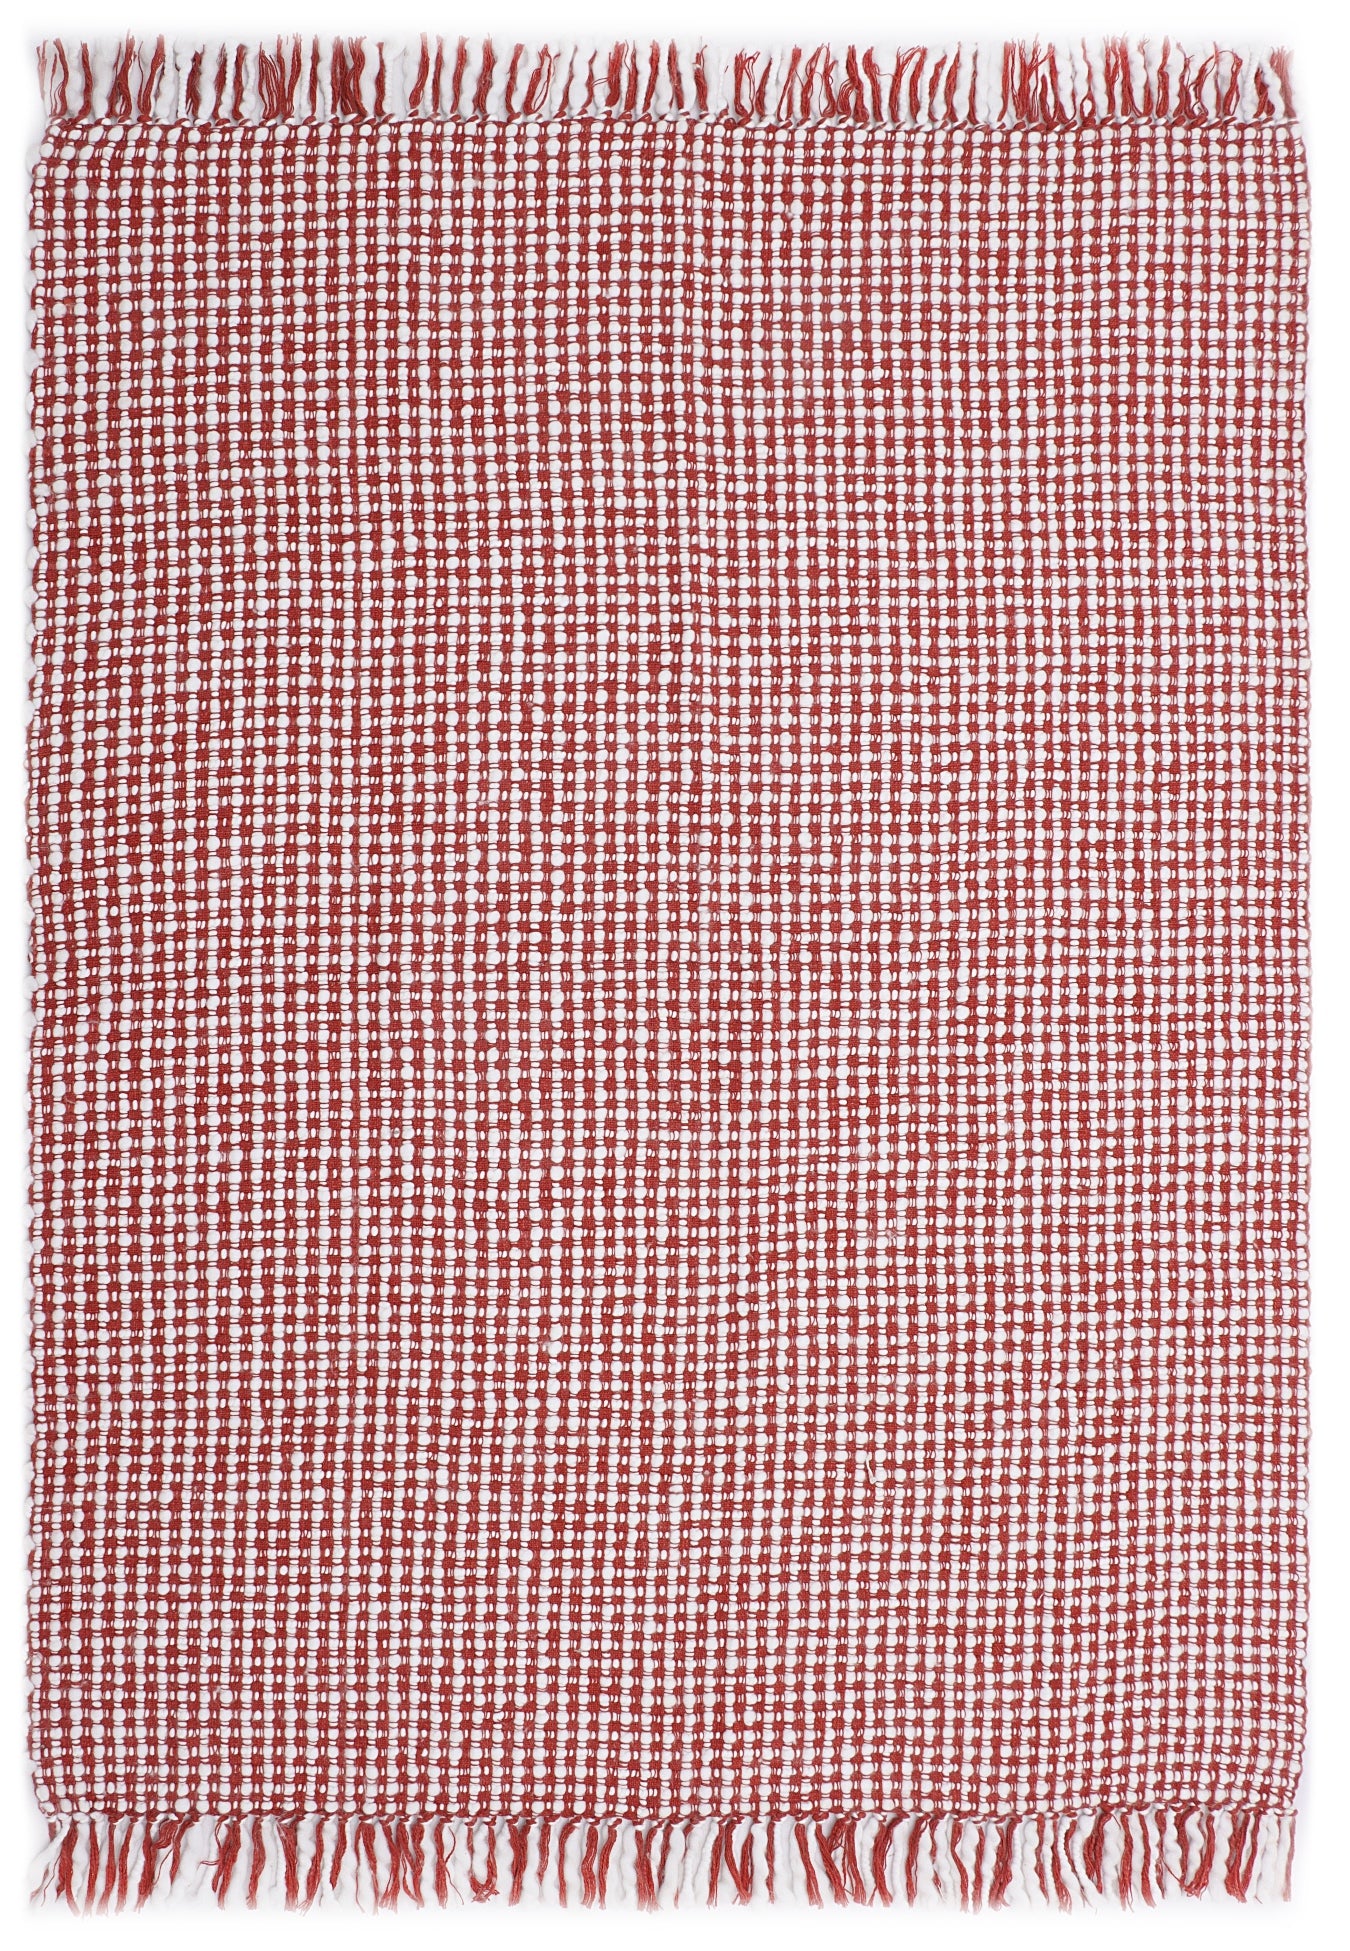 Red and White Hand Woven Throw